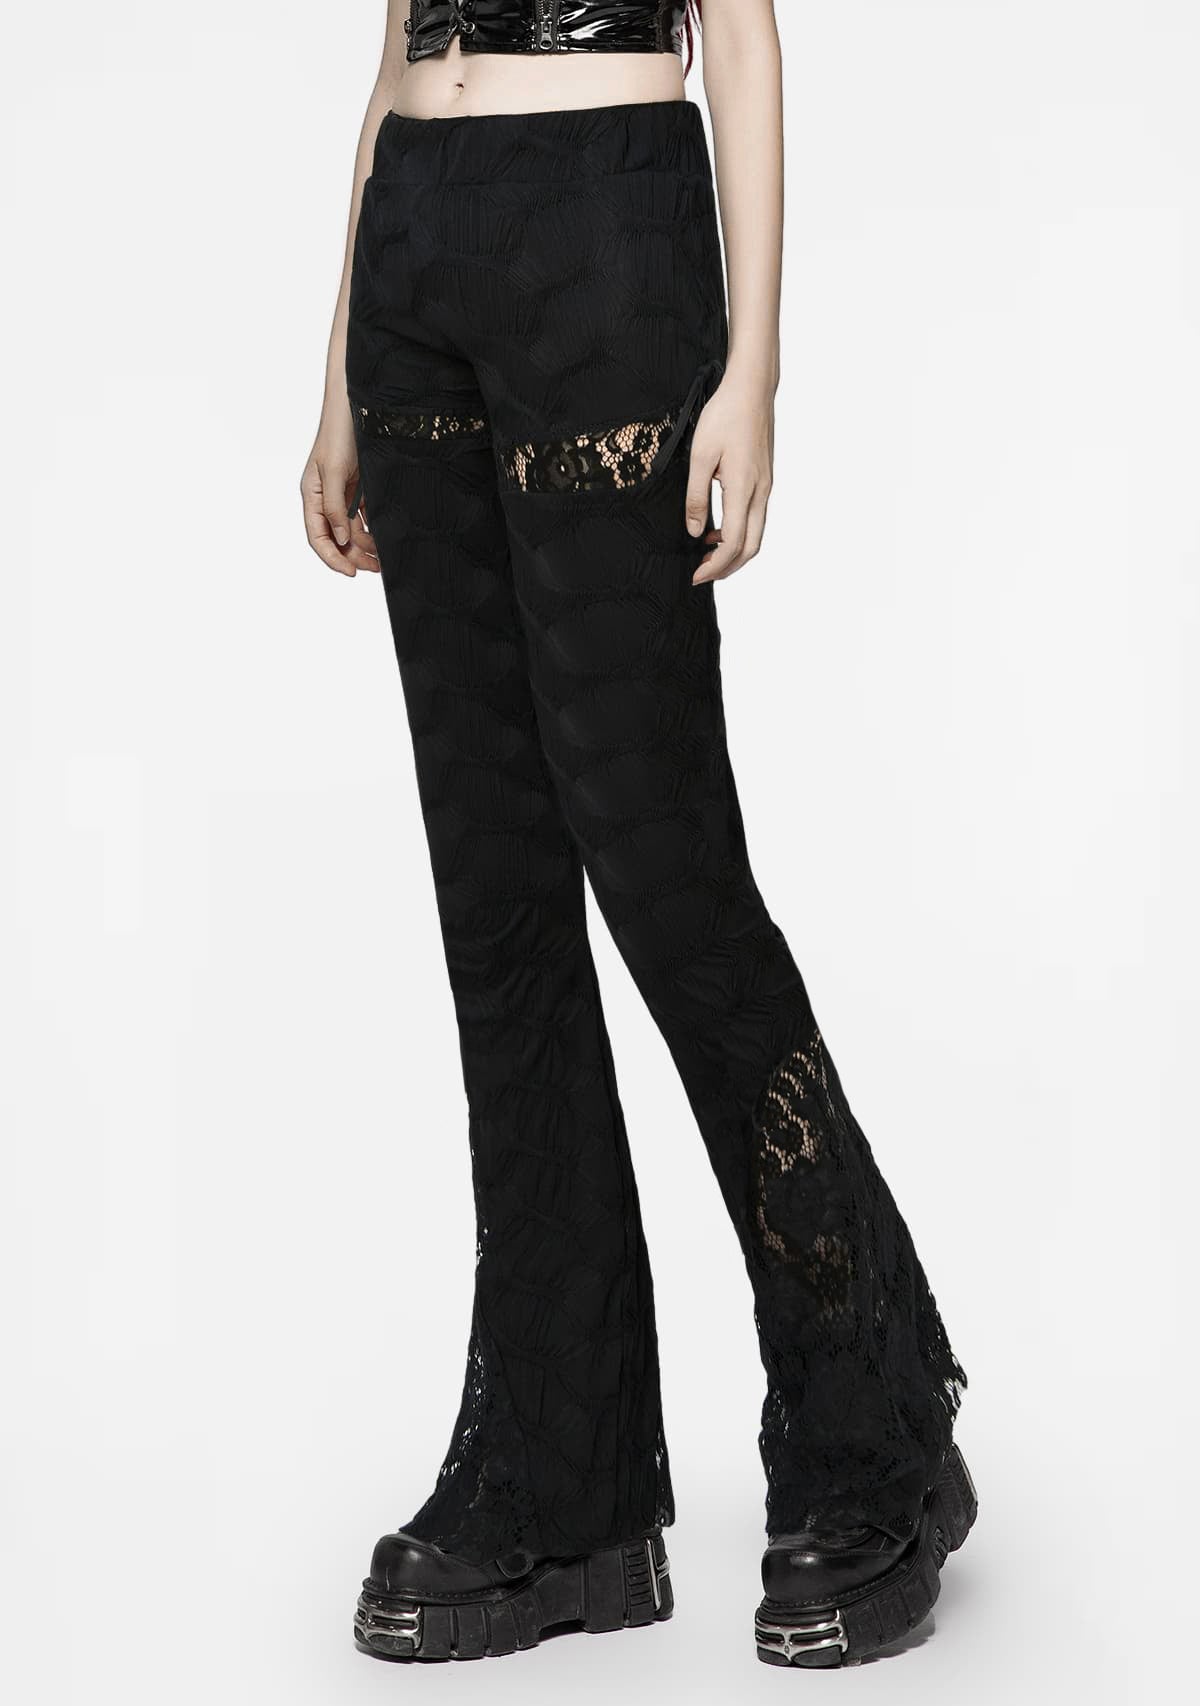 Gothic Strappy Lace Hollow Out Trousers